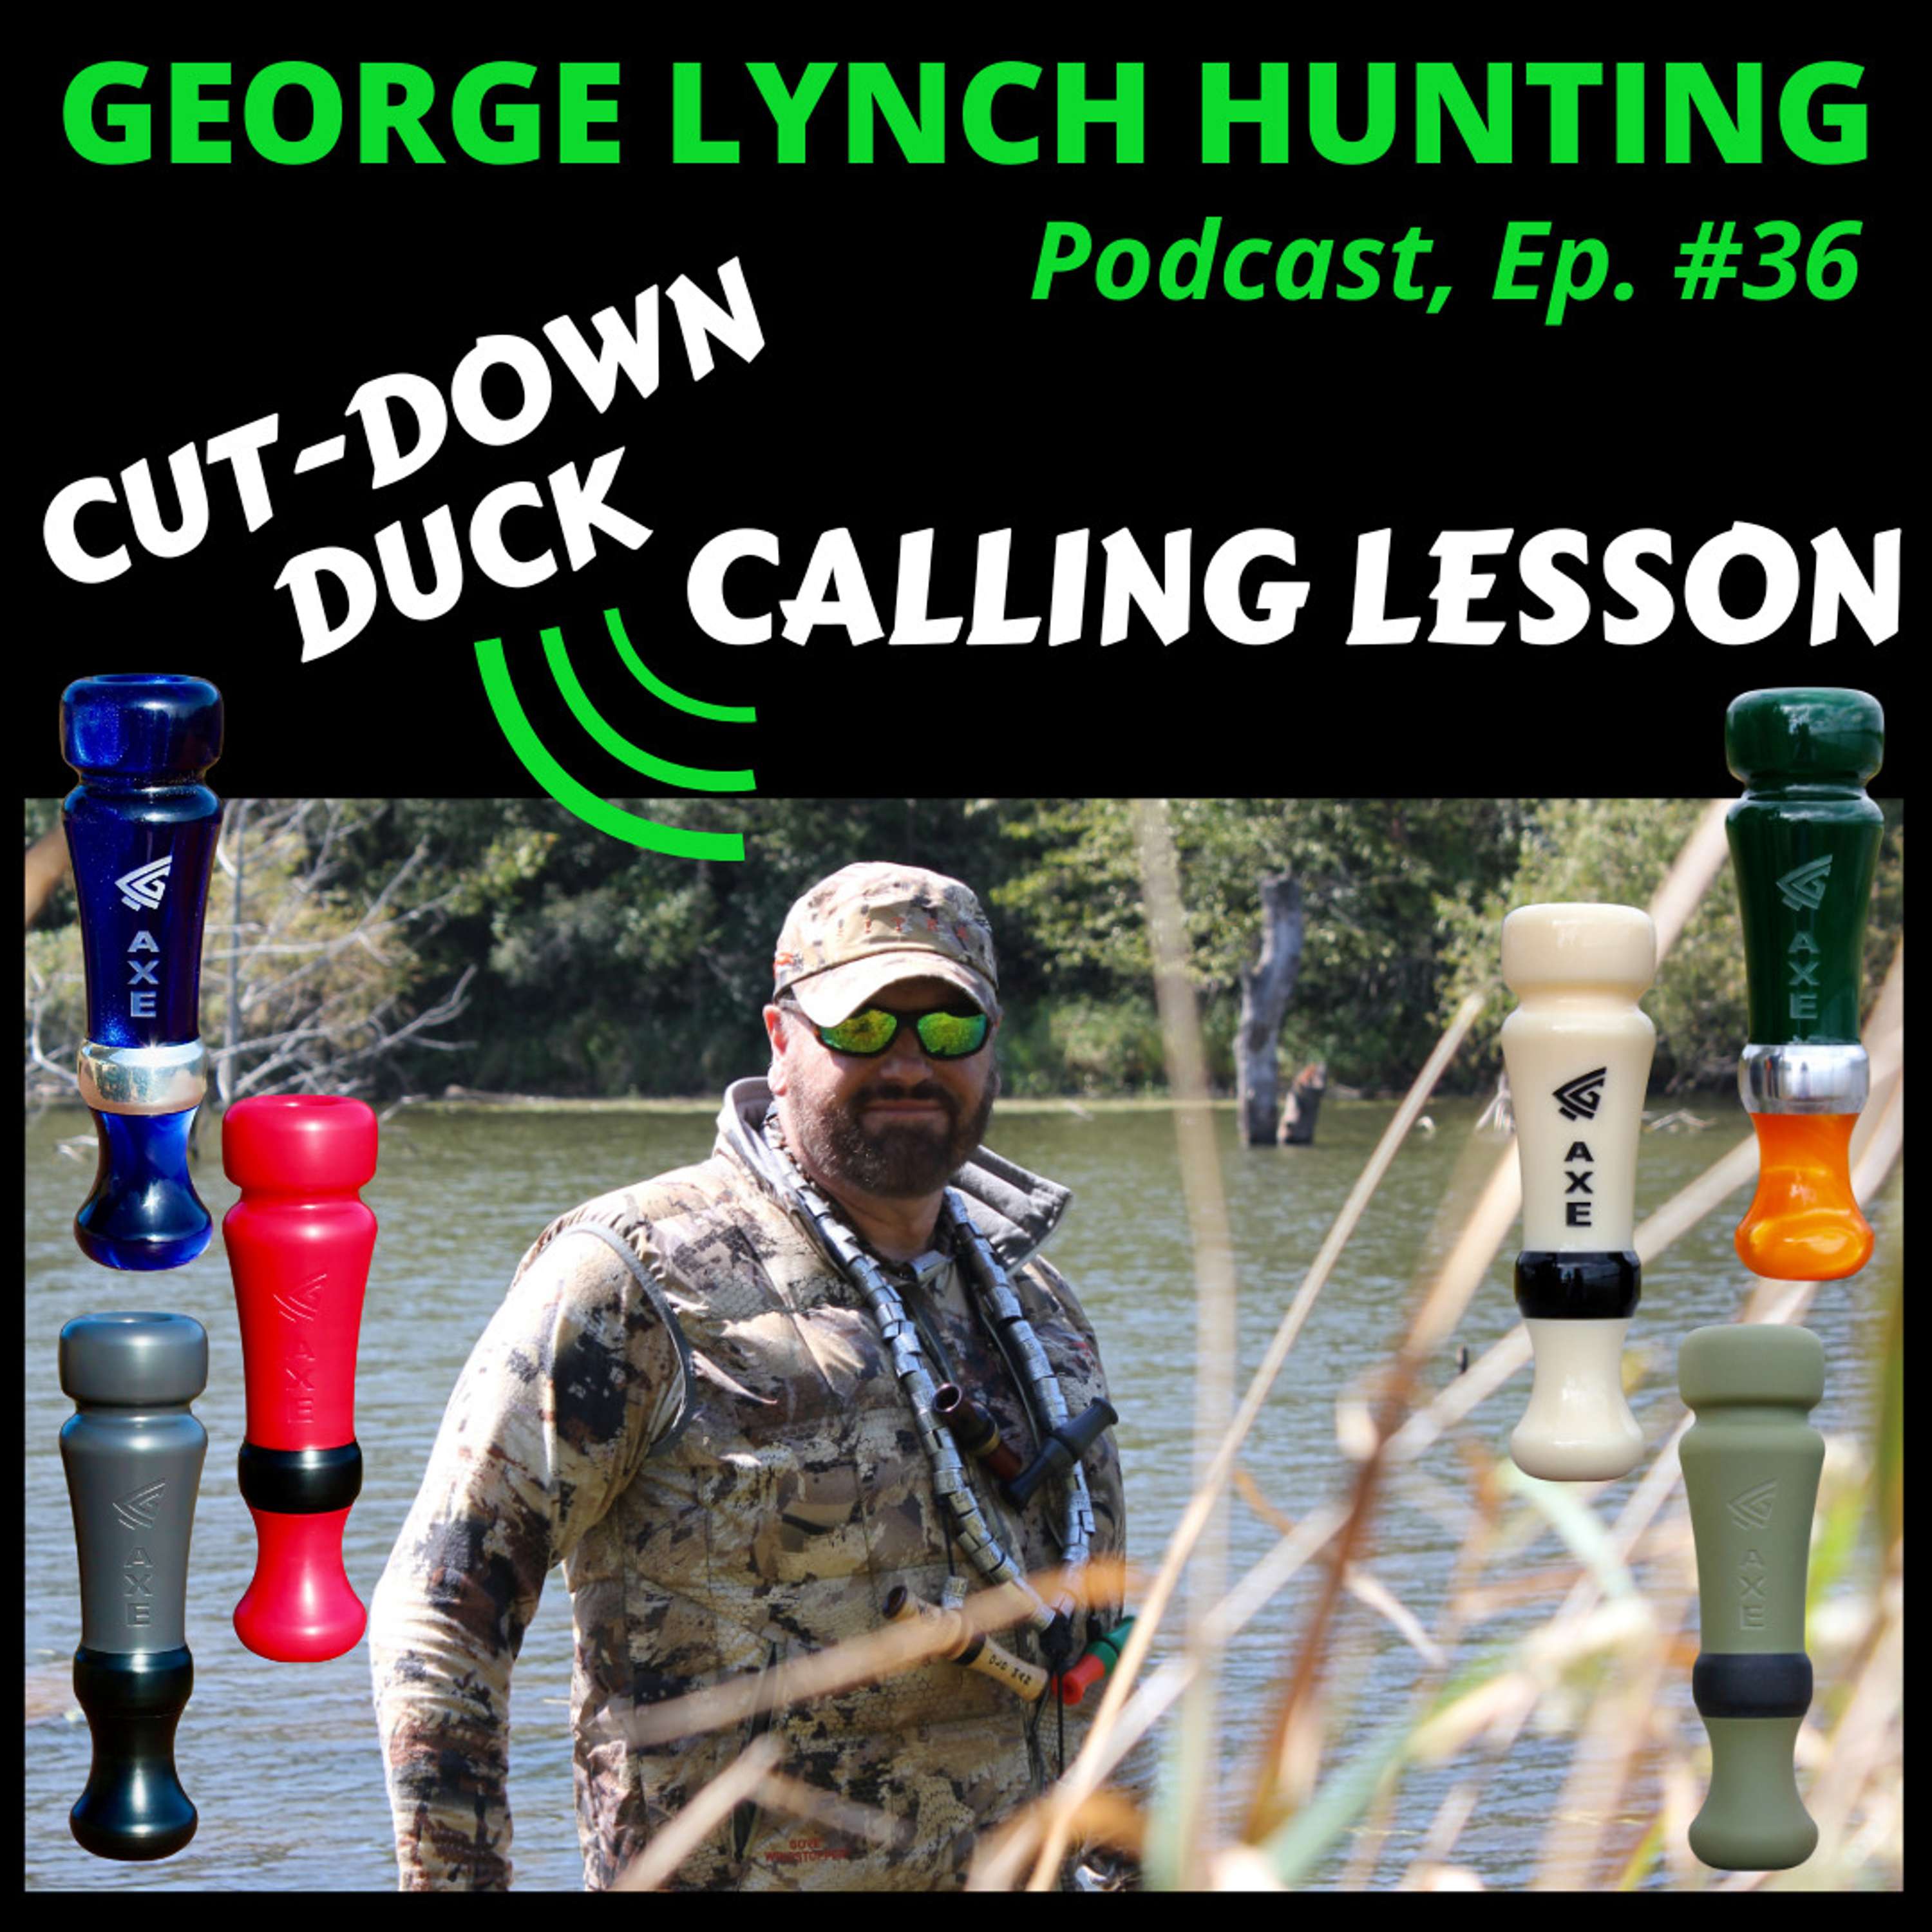 CUT-DOWN DUCK CALLING LESSON AND TECHNIQUES by GEORGE LYNCH